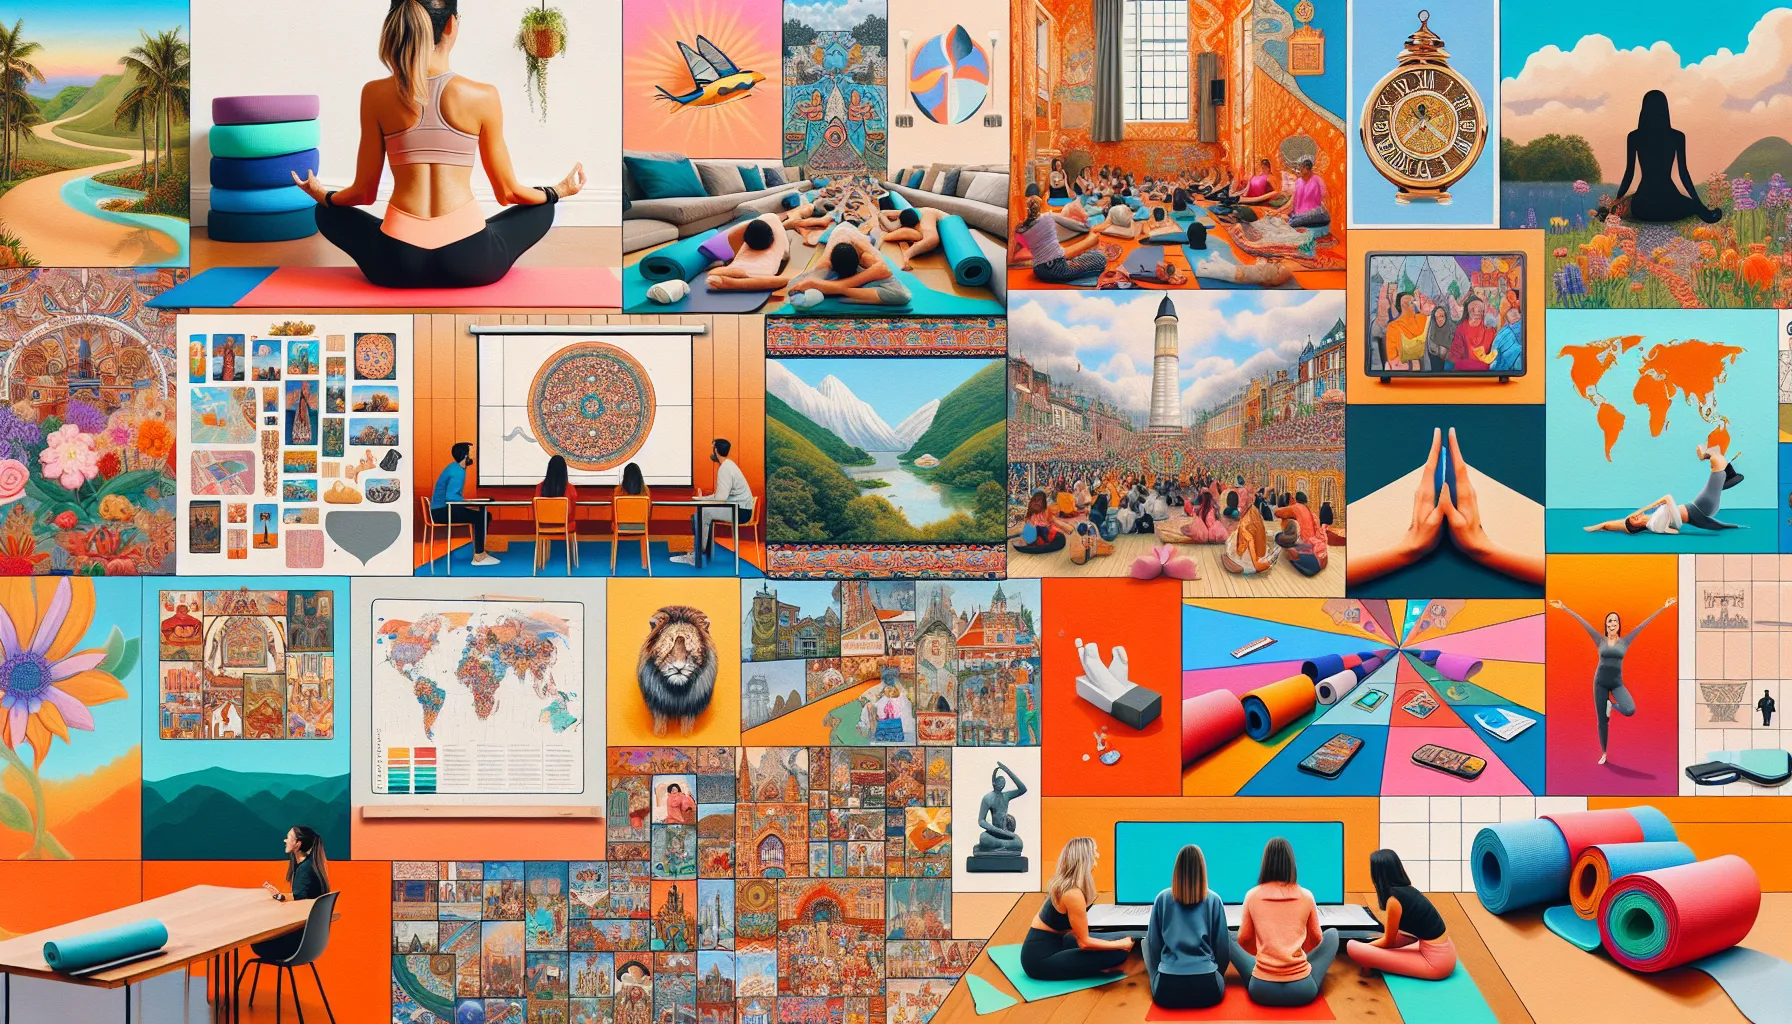 <strong>Uncharted Love:</strong> This collage transcends the ordinary, weaving together scenes of a Zoom yoga class's tranquility and a PowerPoint party's vibrant exchange, to the adventurous spirit of Geoguessr, capturing the essence of creativity and exploration in the world of virtual dating.